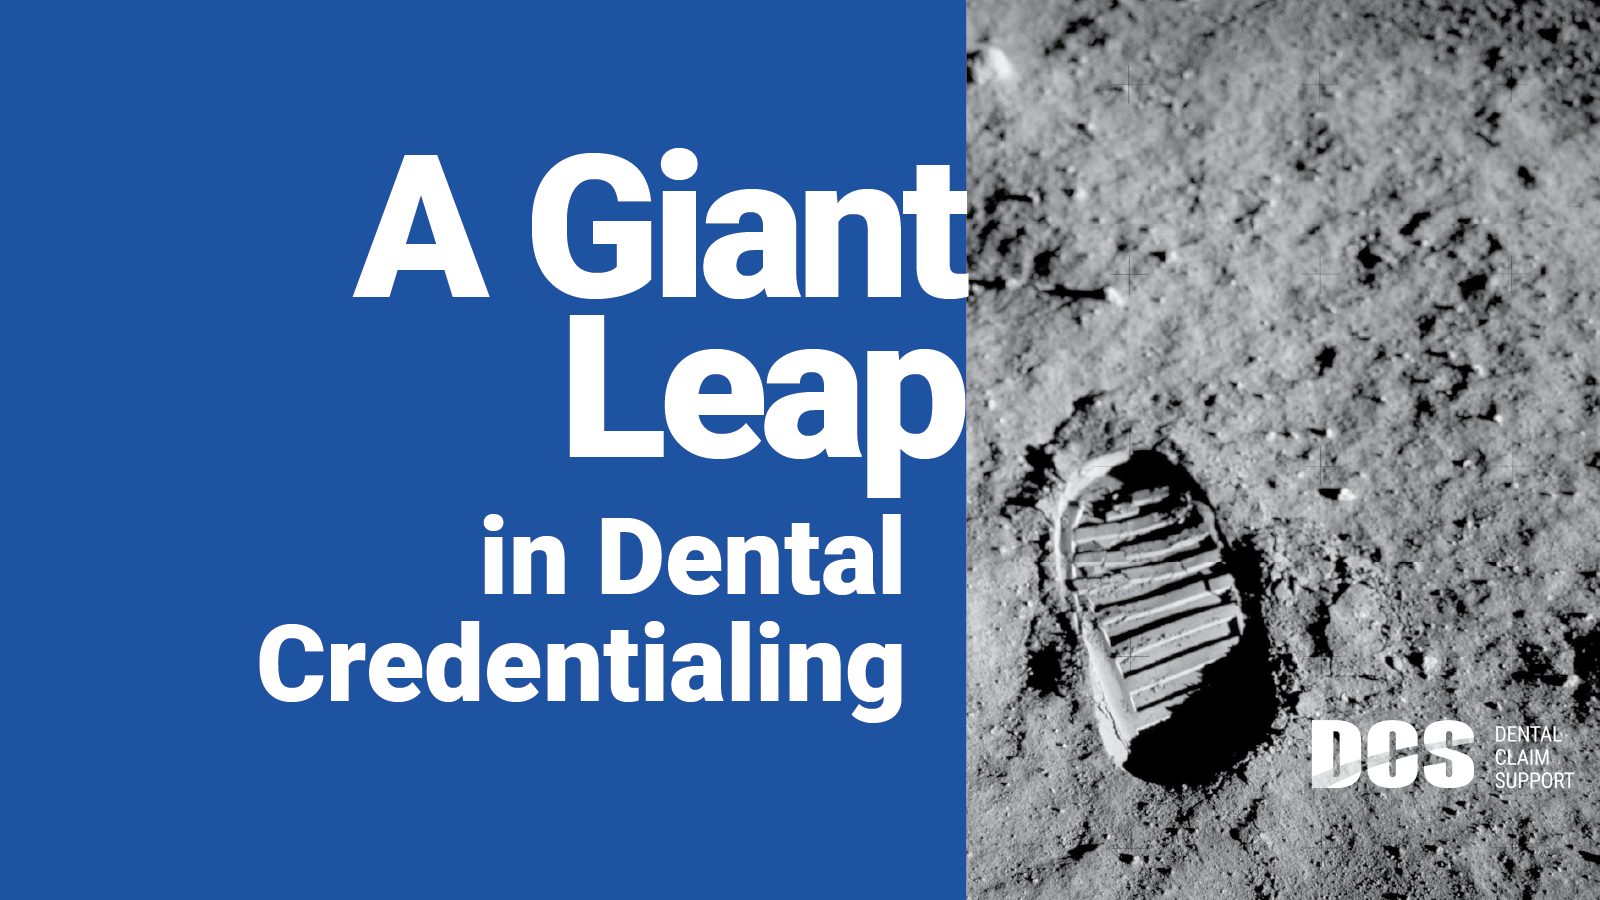 A Giant Leap in Dental Credentialing